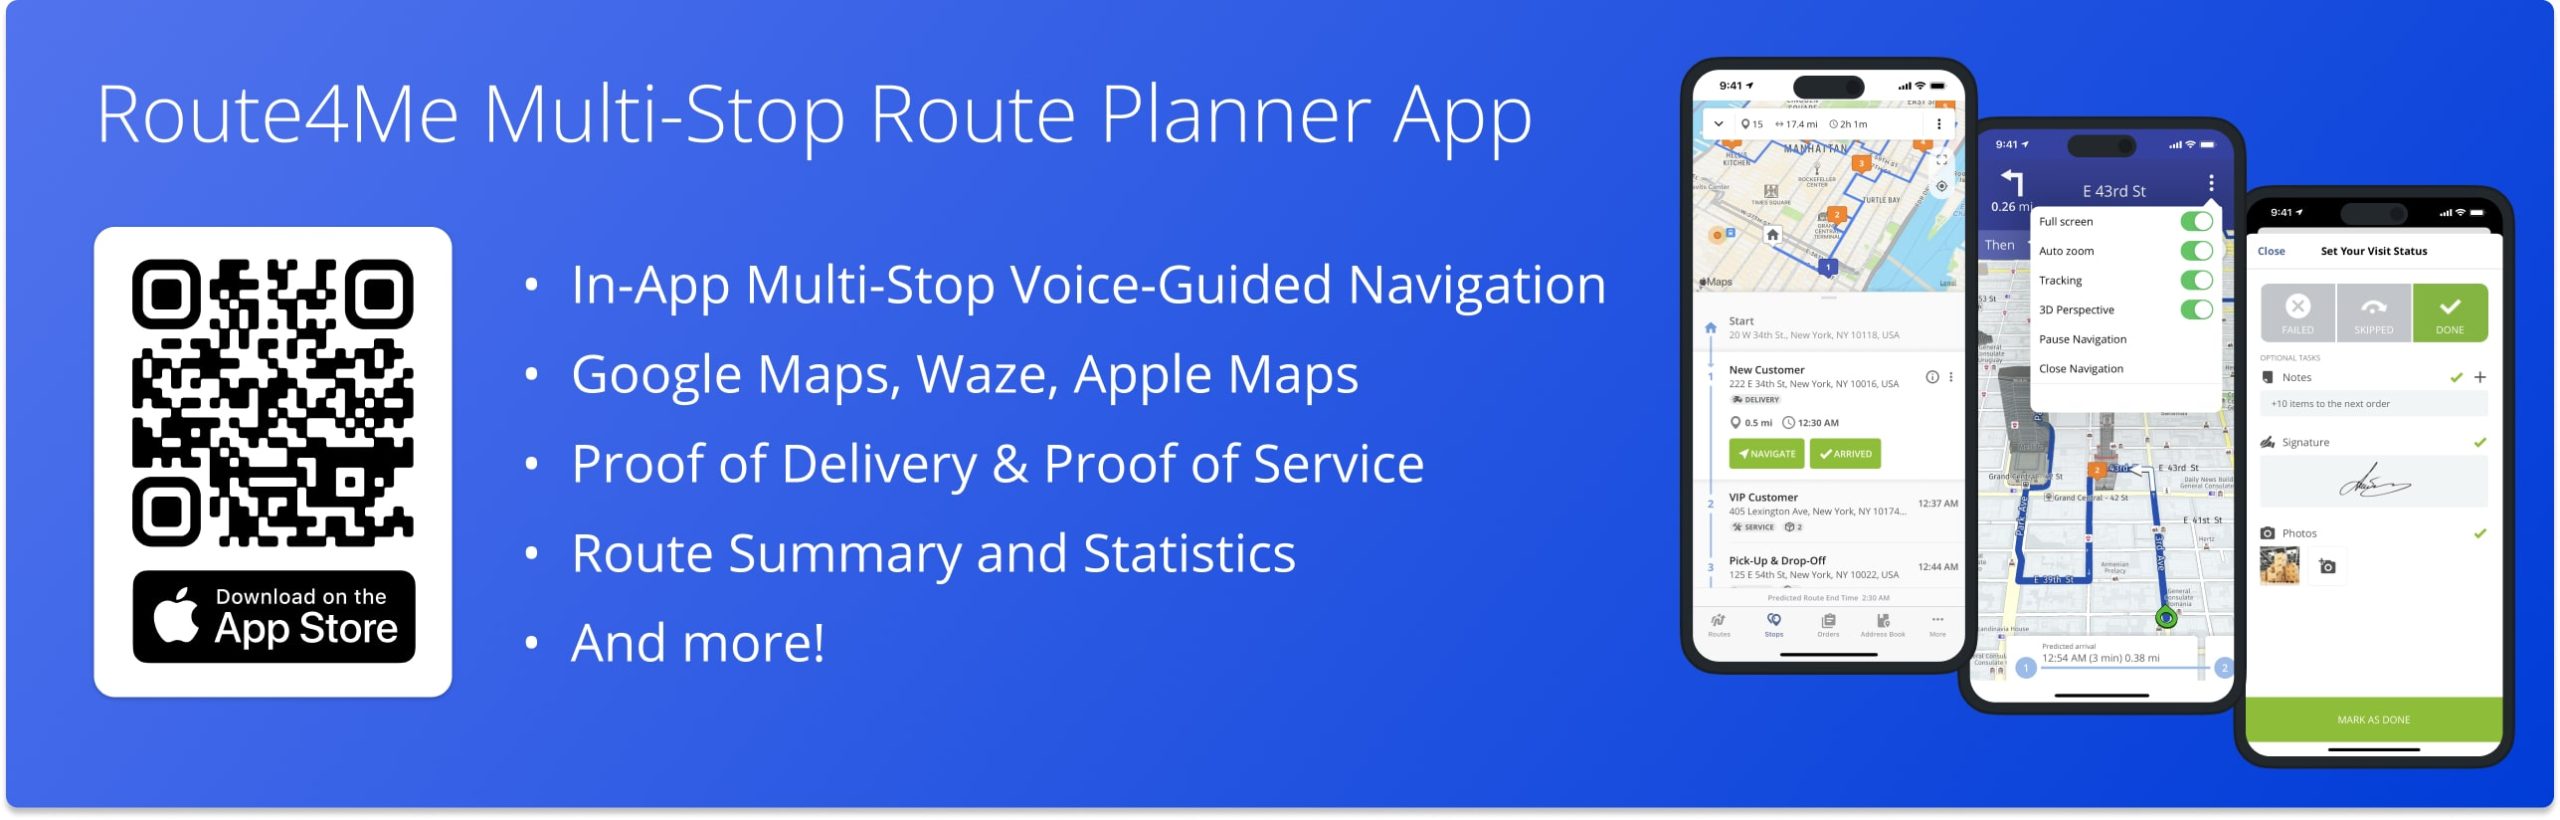 Multi-stop route navigation with in-app navigation, Google Maps, Apple Maps, and Waze on Route4Me's Route Planner app.